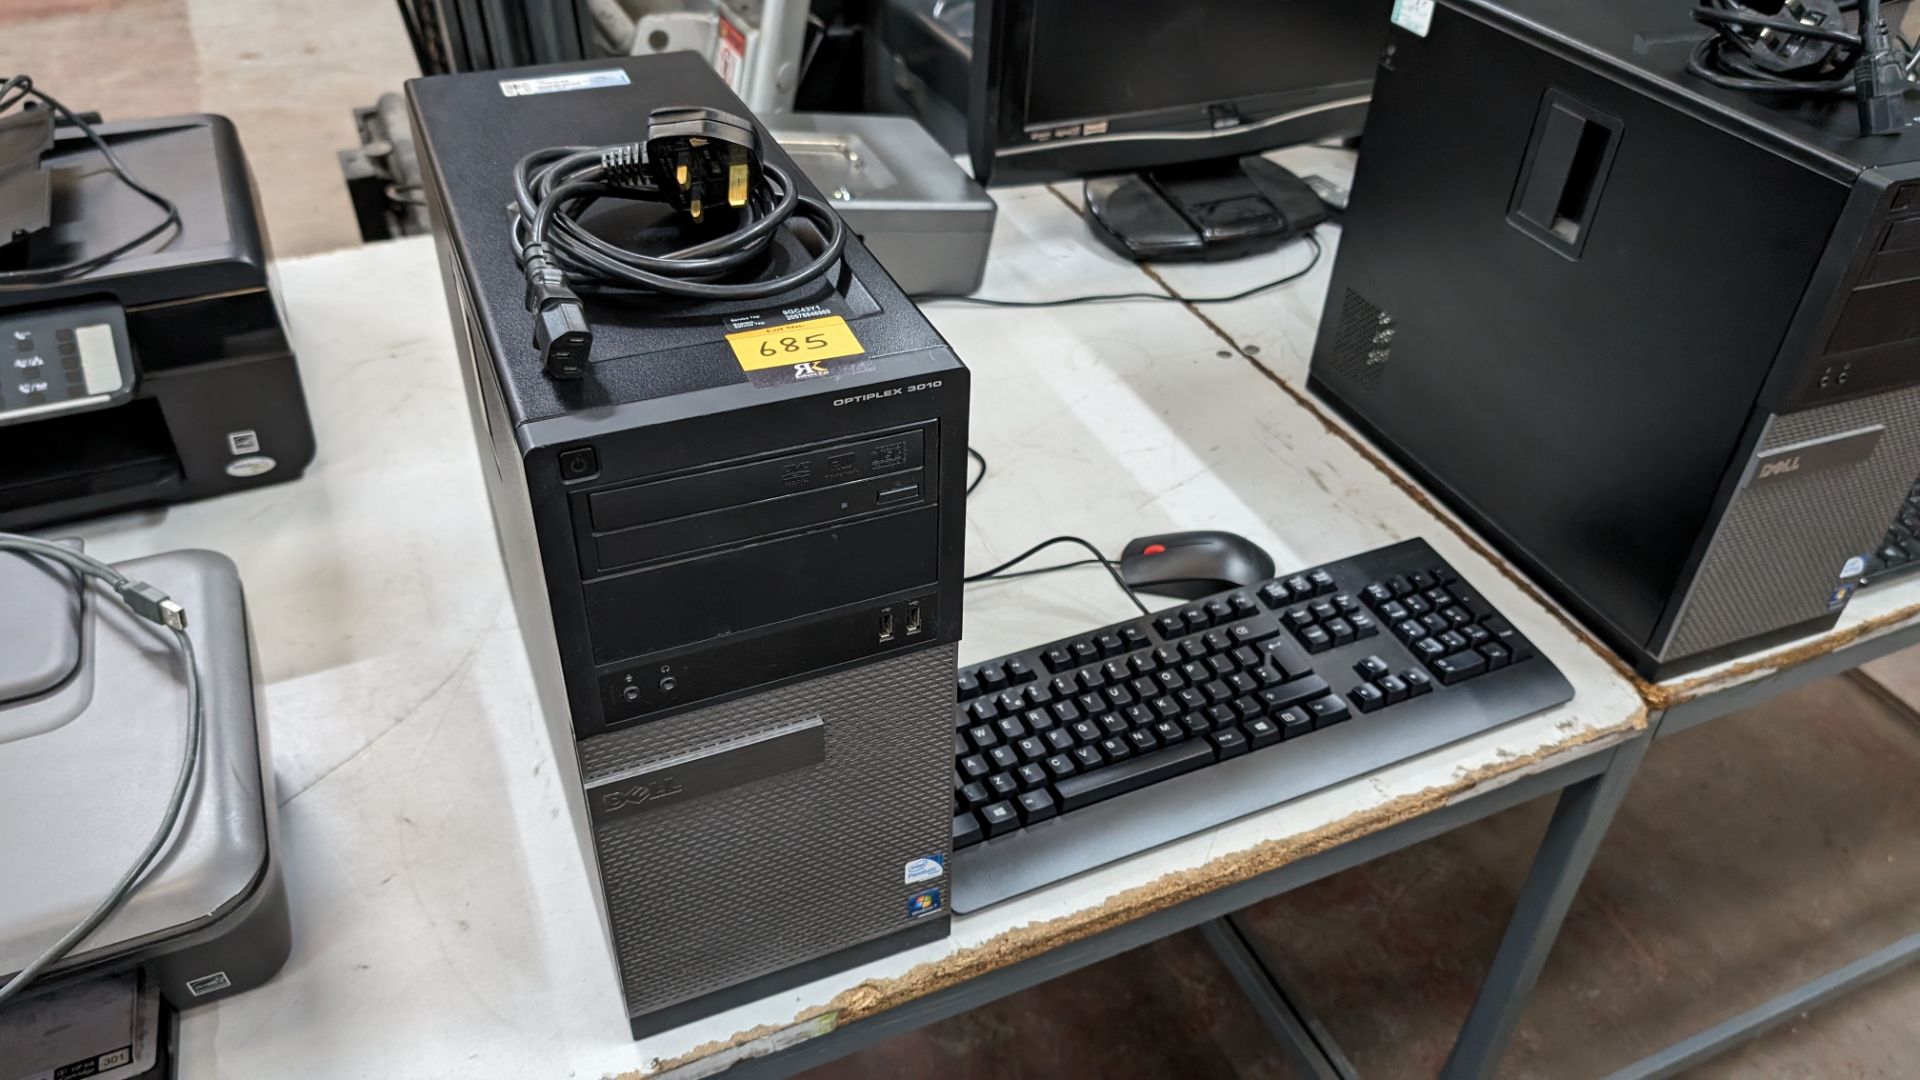 3 off desktop computers each including keyboard and mouse - Image 5 of 10